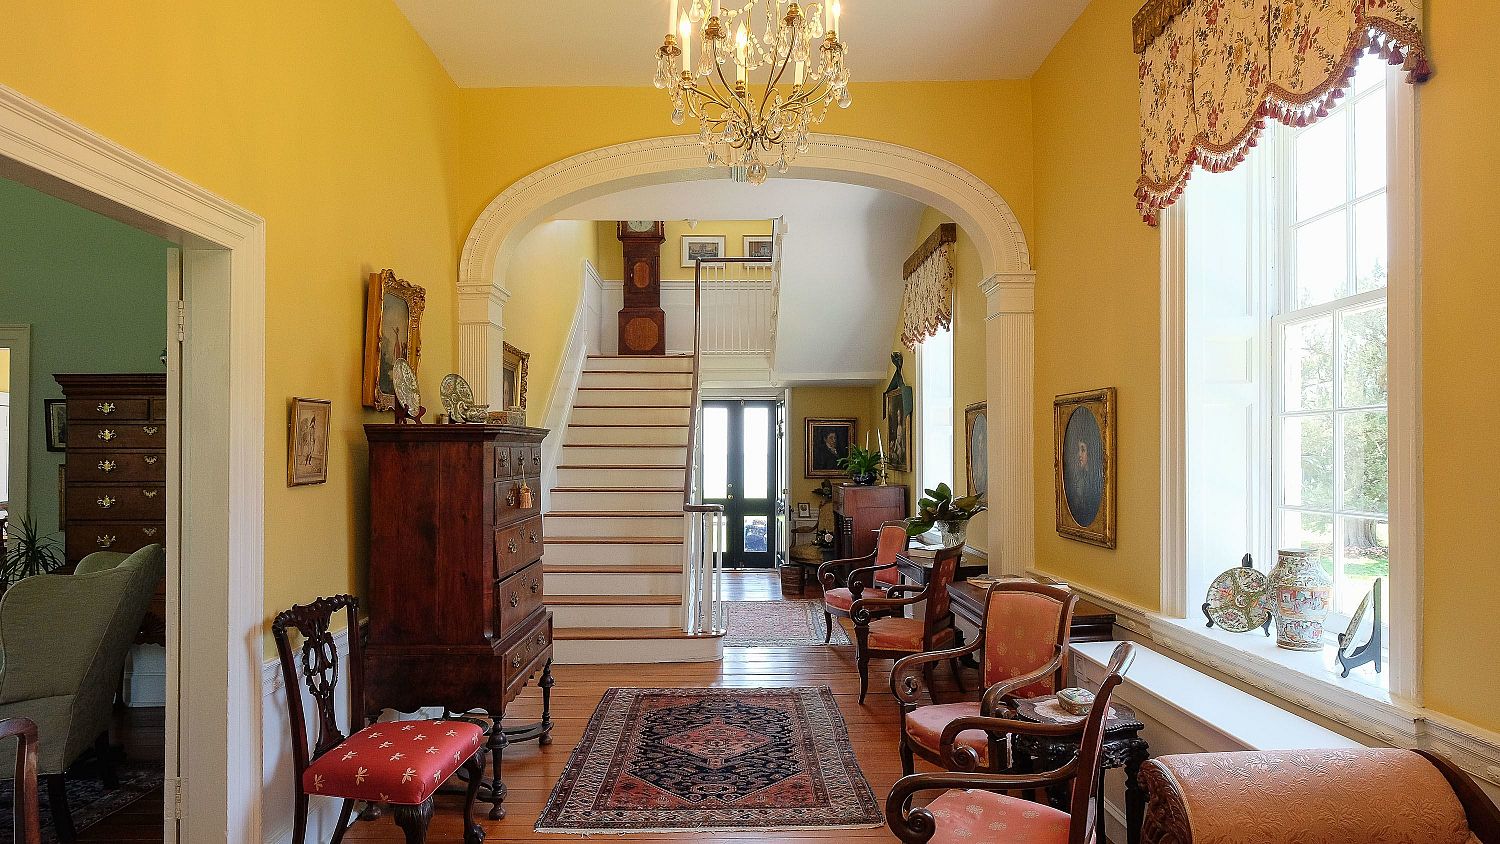 The entrance foyer of the Mulberry Hill manor house